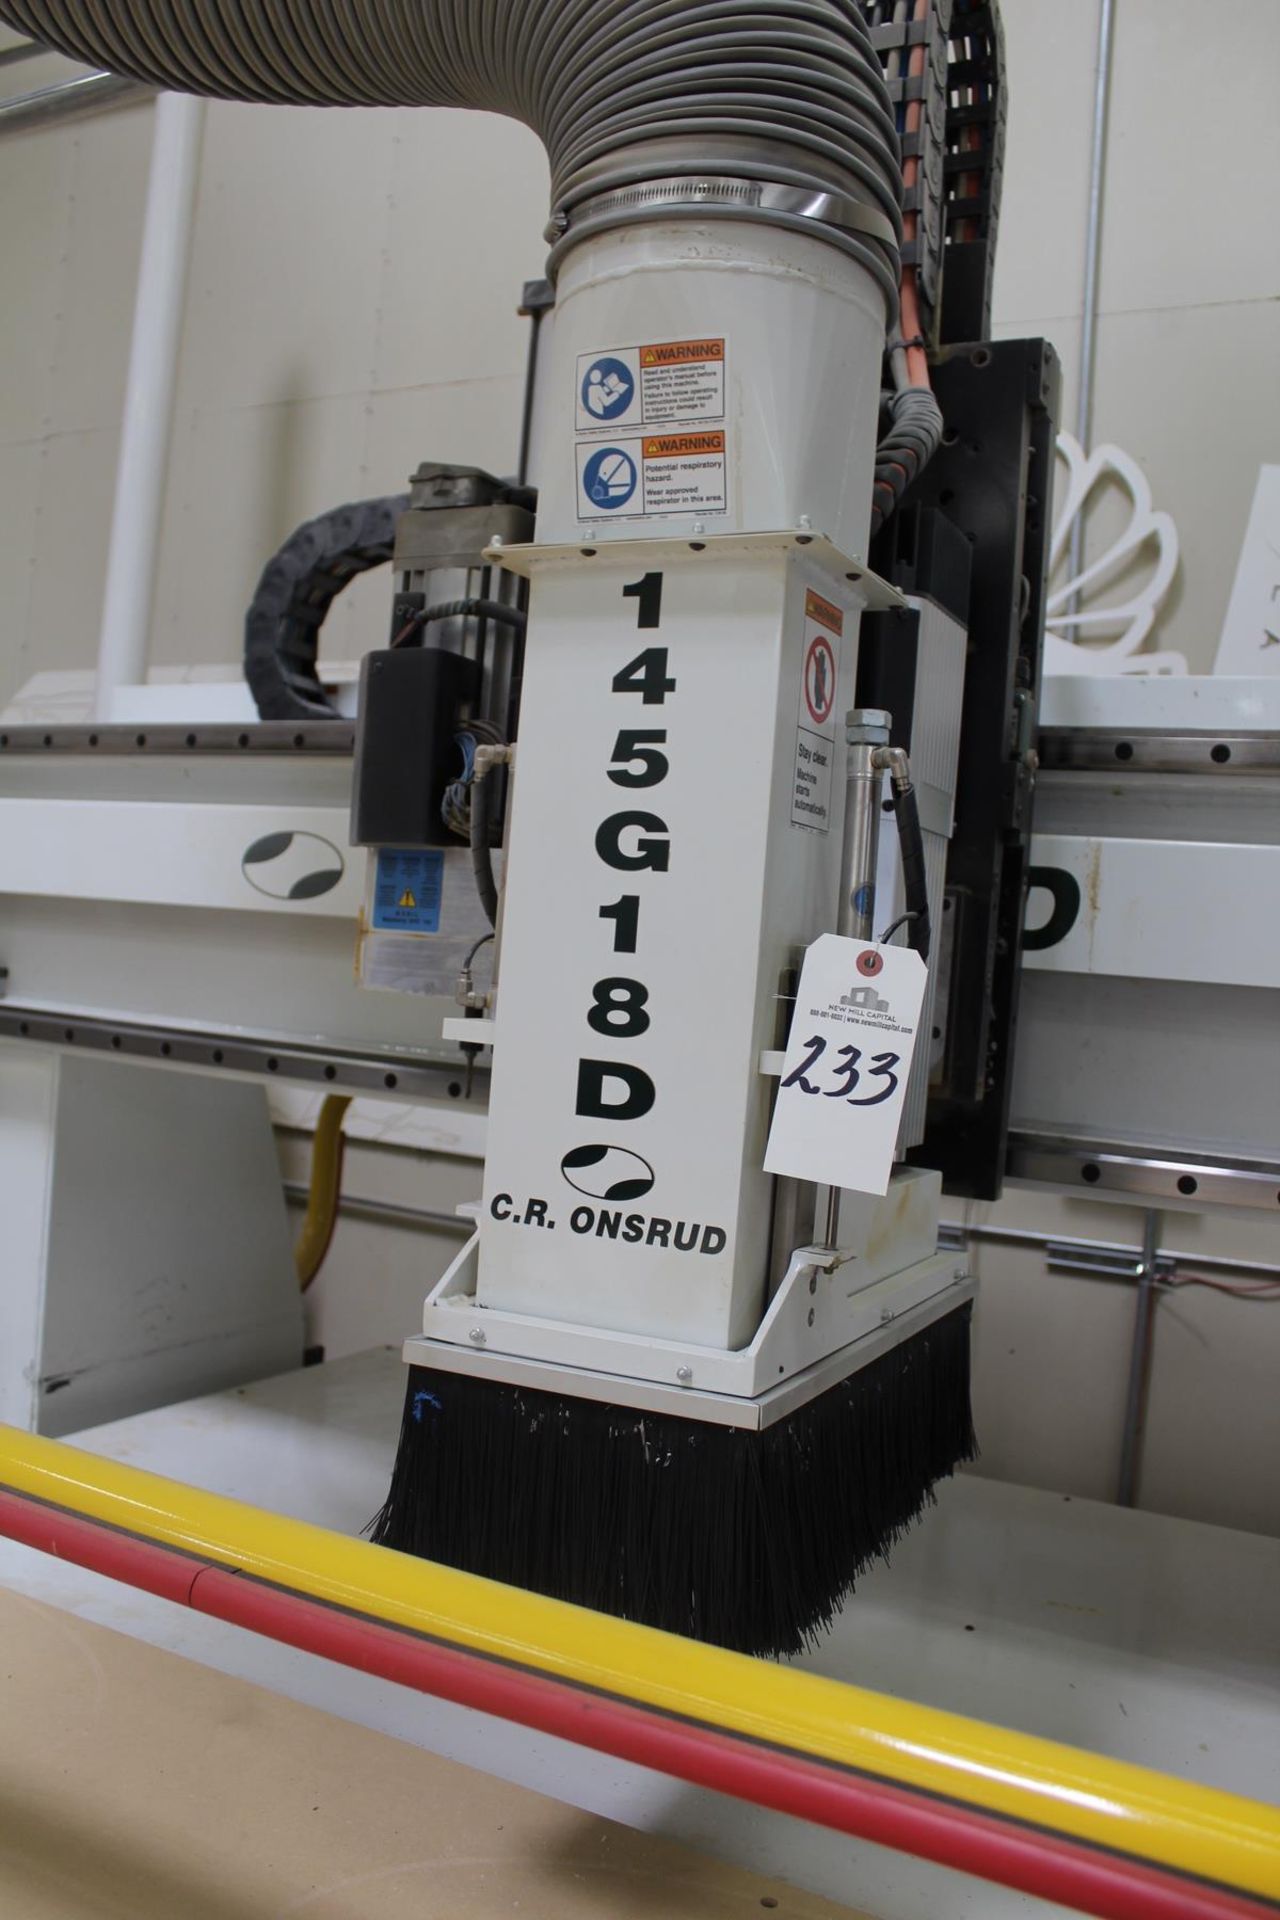 2013 C.R. Onsrud CNC Router, Model 145G18D, S/N 145G130402, 5'X 12' Vacuum Hold Dow | Rig Fee: $1150 - Image 4 of 9